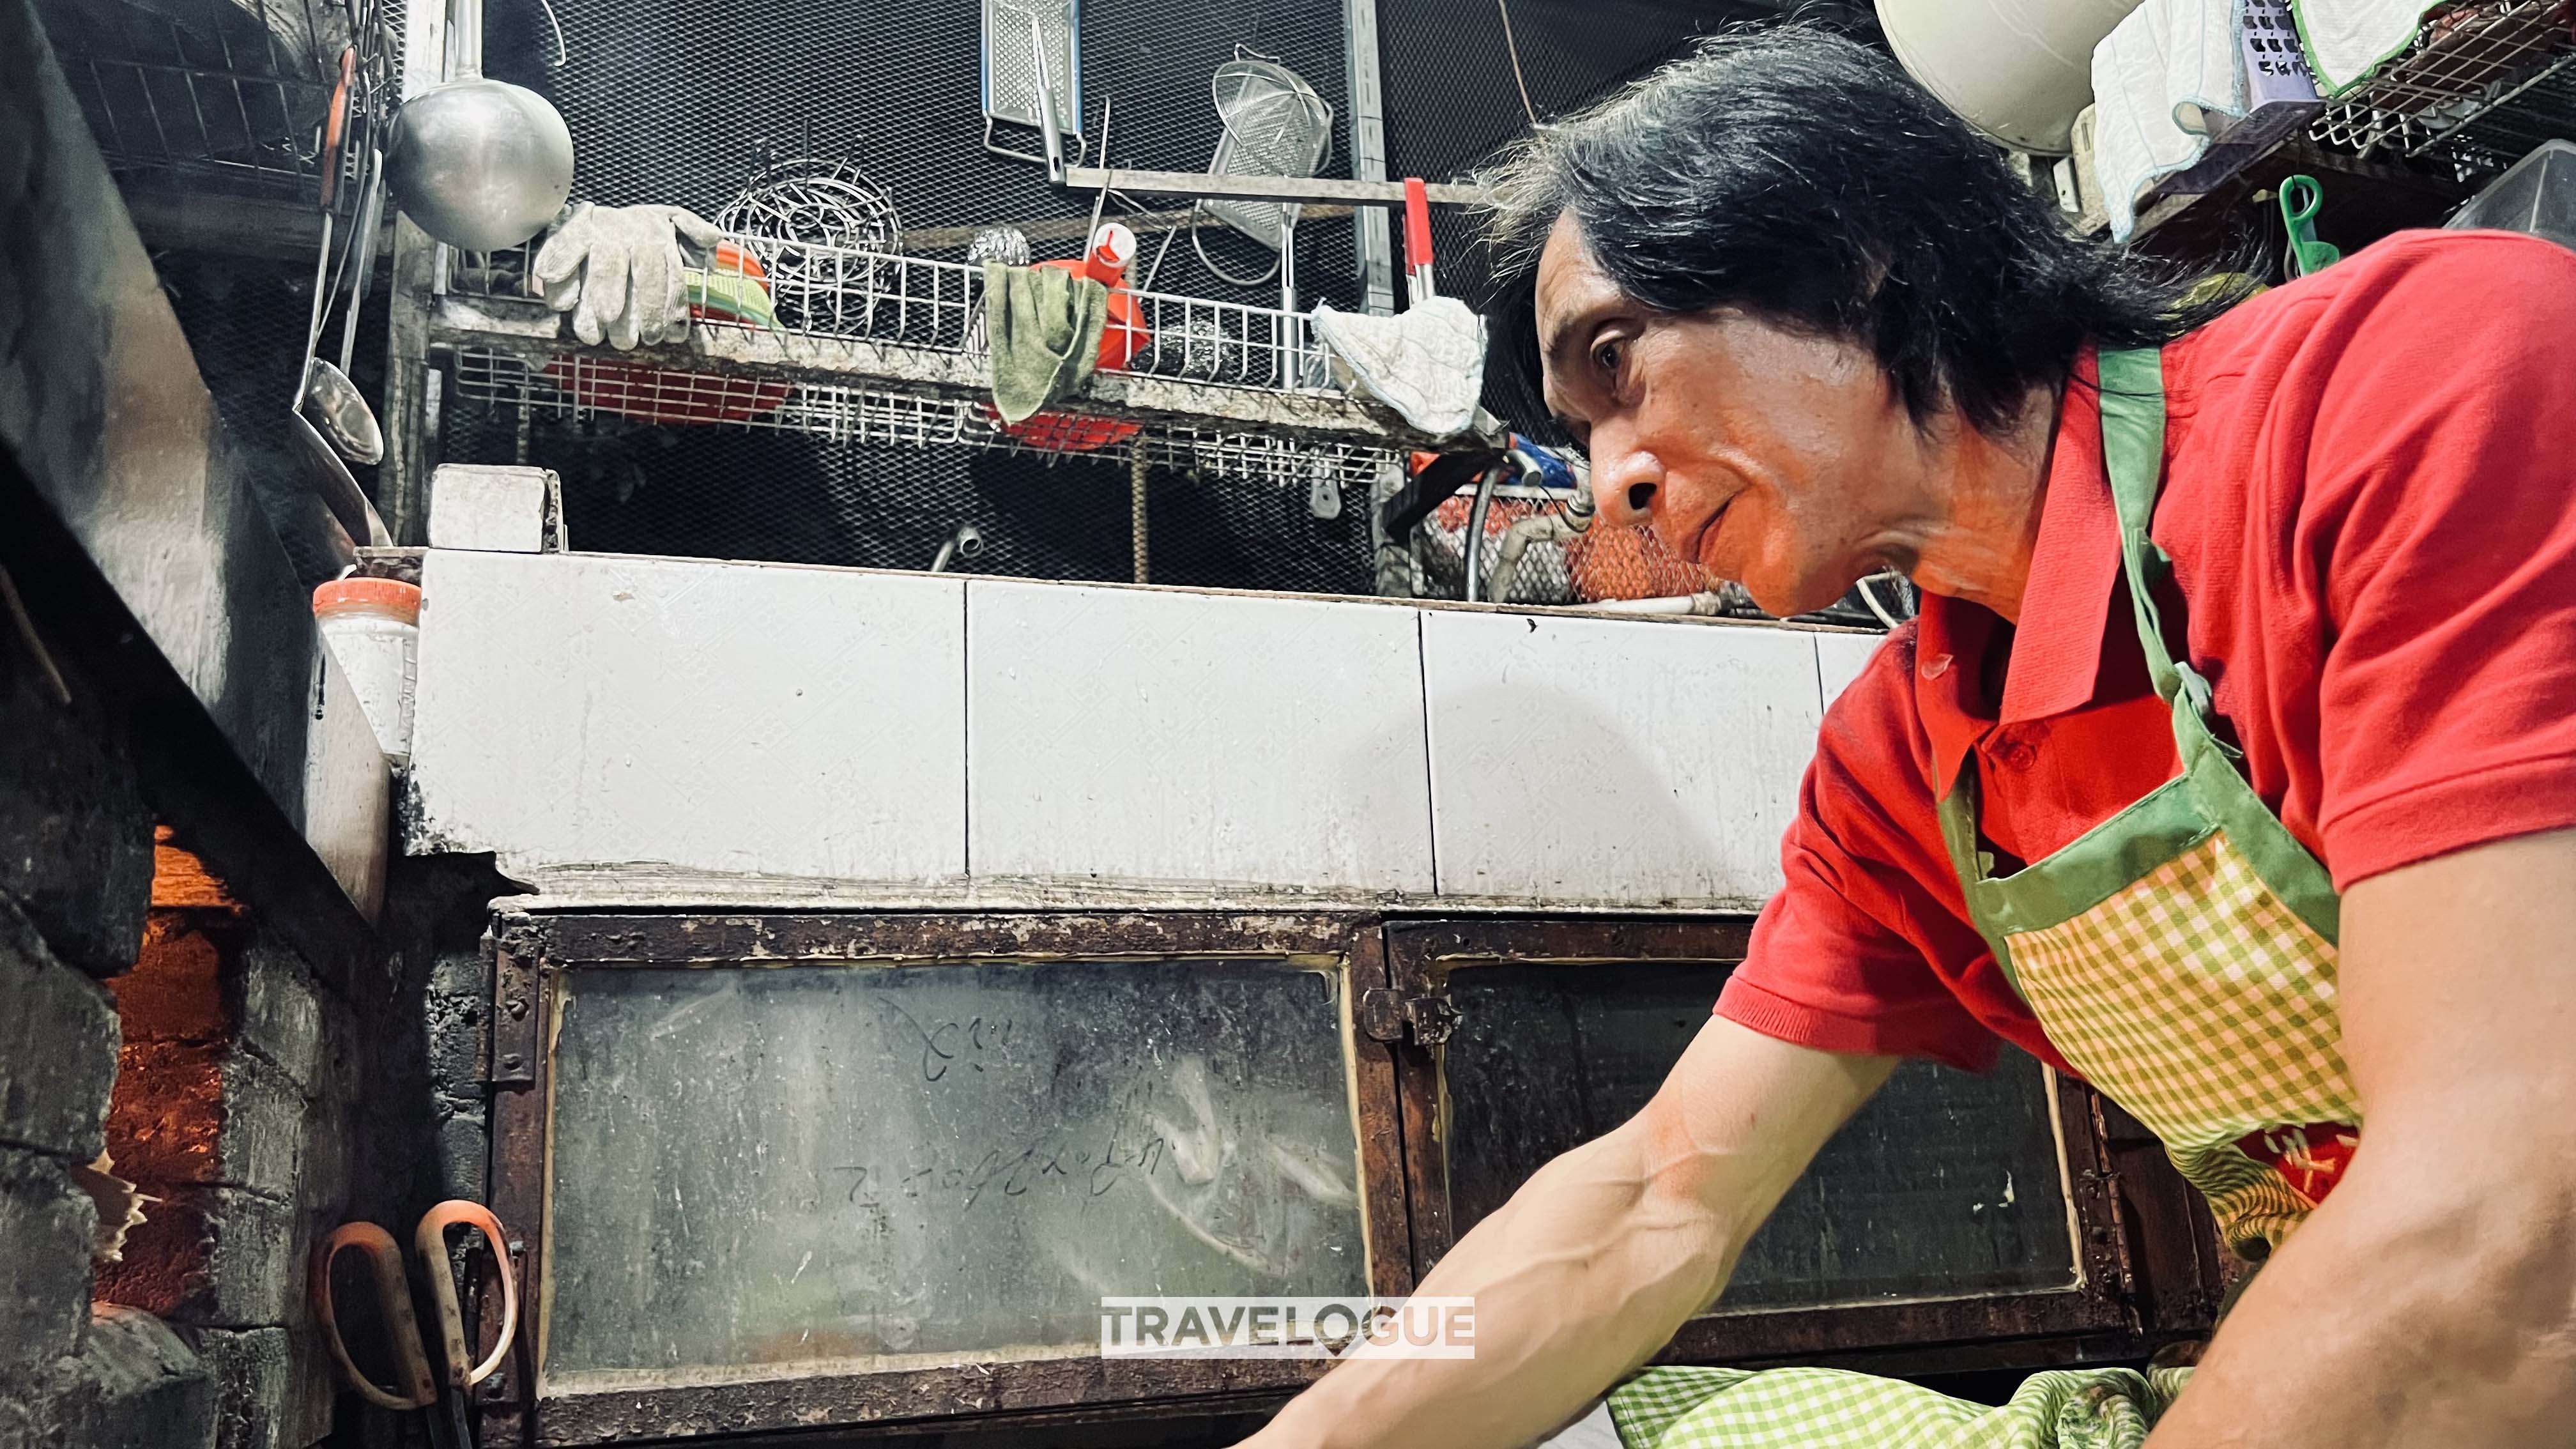 Master Liu Weixin prepares dinner for his apprentice in Foshan, south China's Guangdong Province. /CGTN